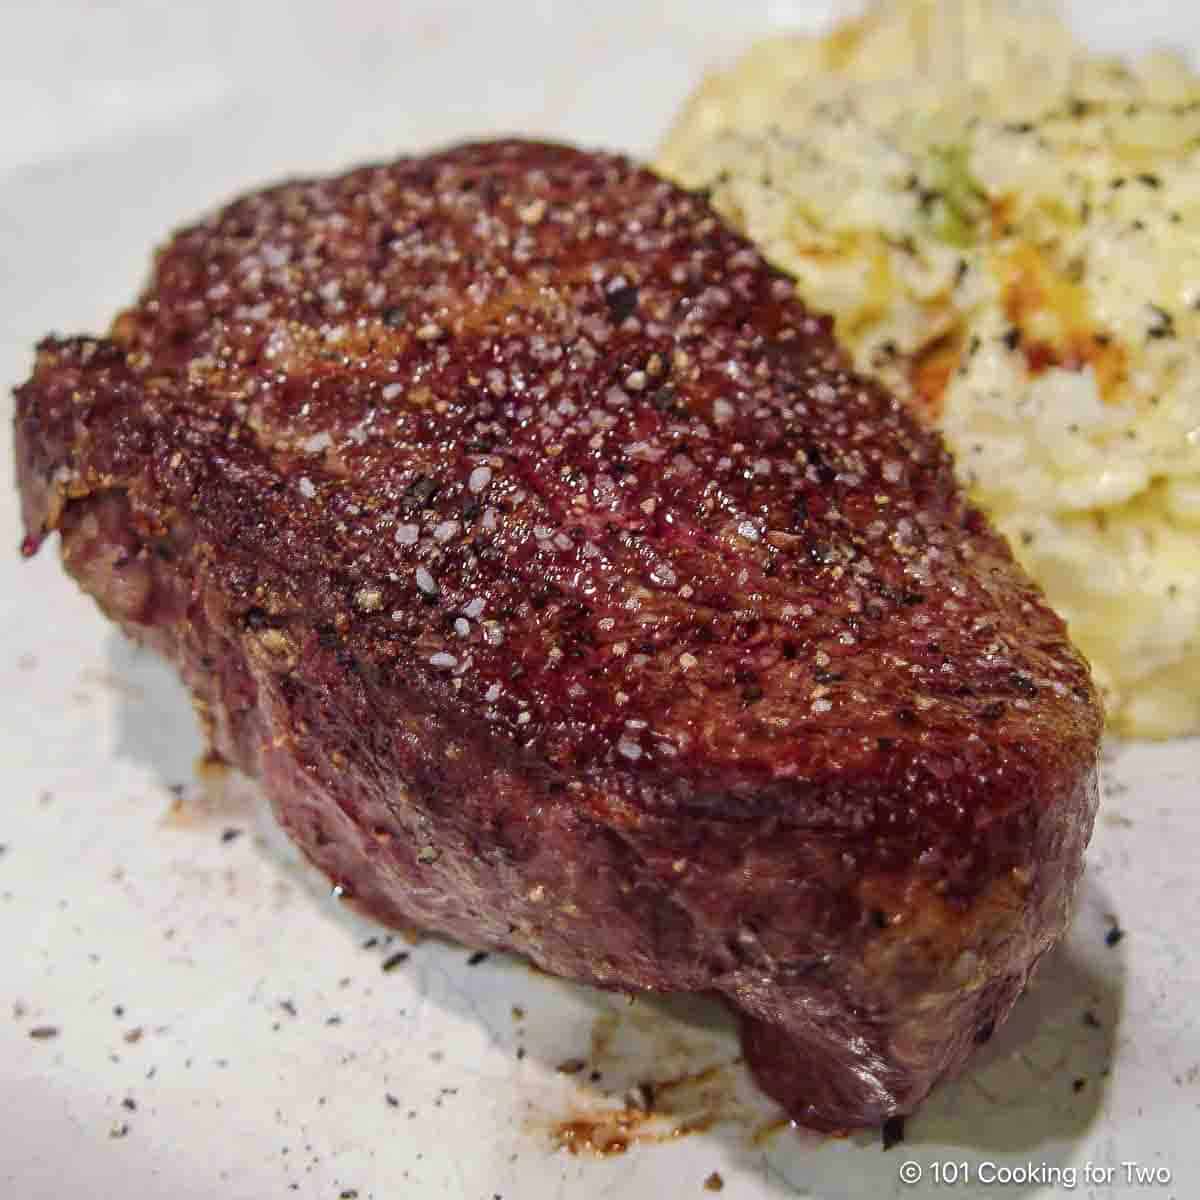 filet with potatoes on a white plate.